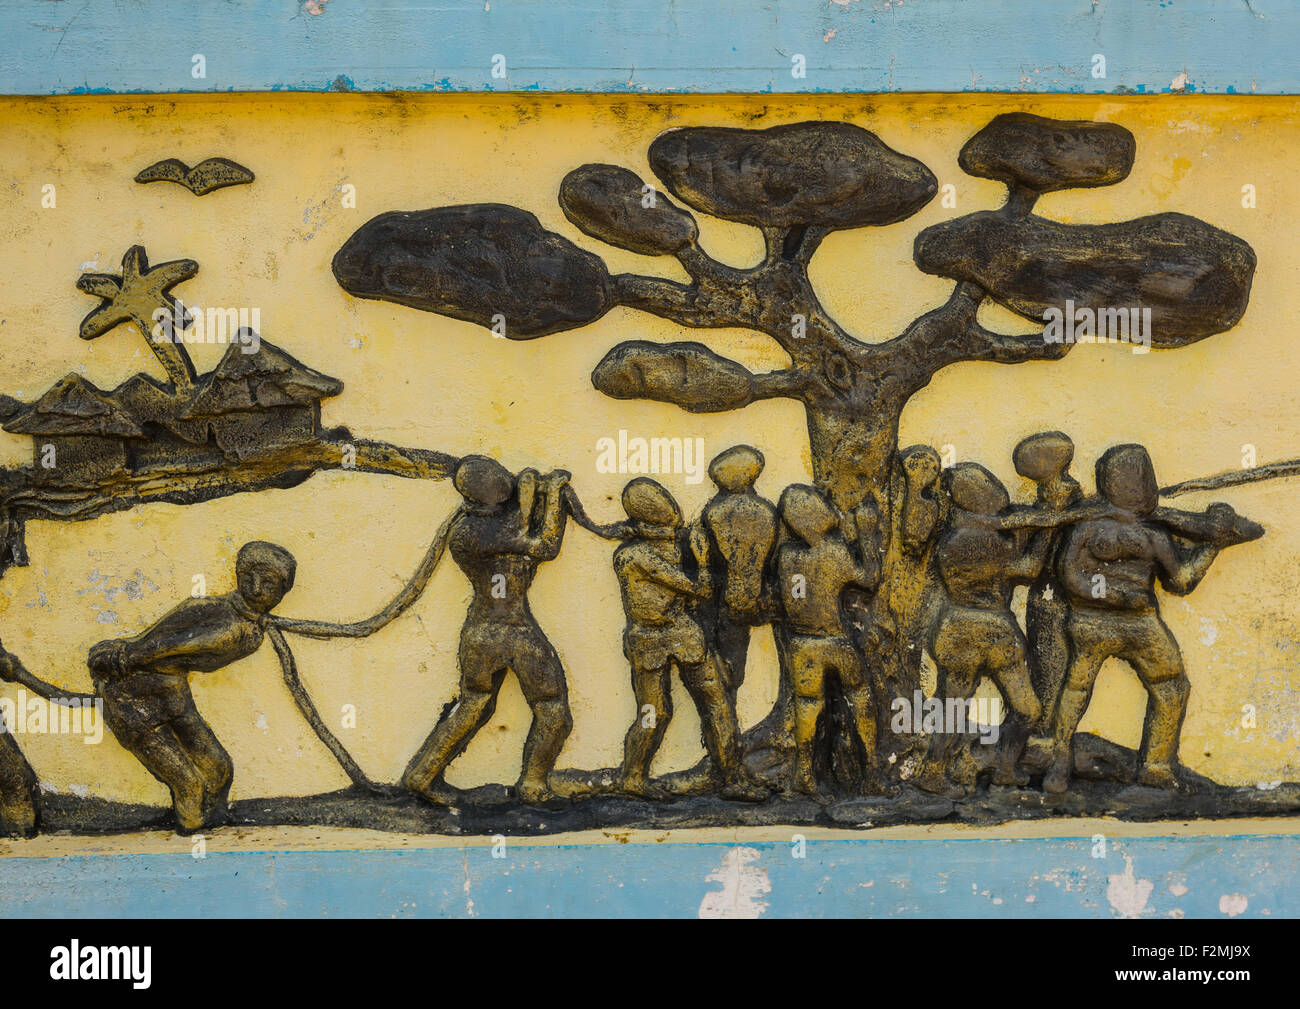 Benin, West Africa, Ouidah, the memorial zomachi on the slave trail showing slaves under a tree Stock Photo